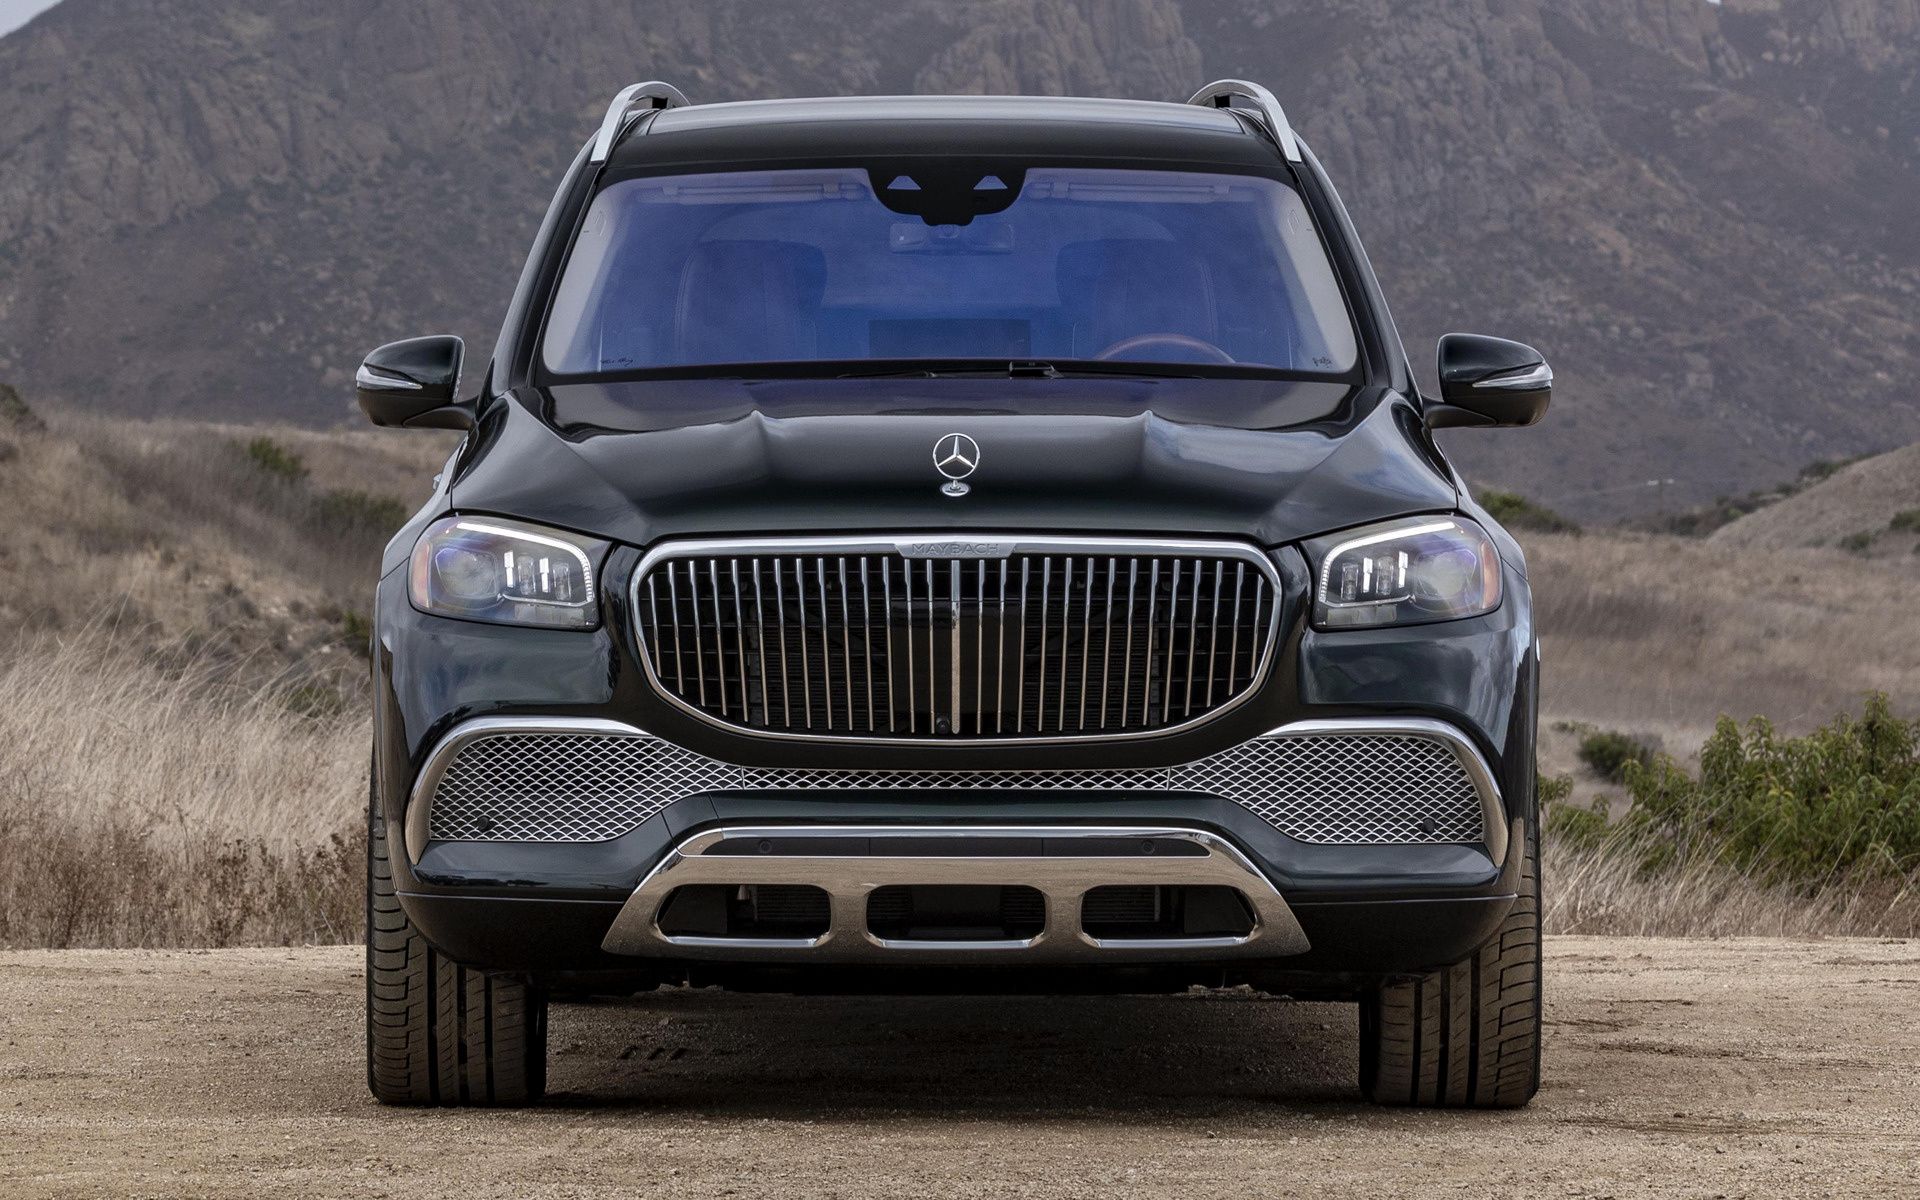 Mercedes Maybach GLS Class (US) And HD Image